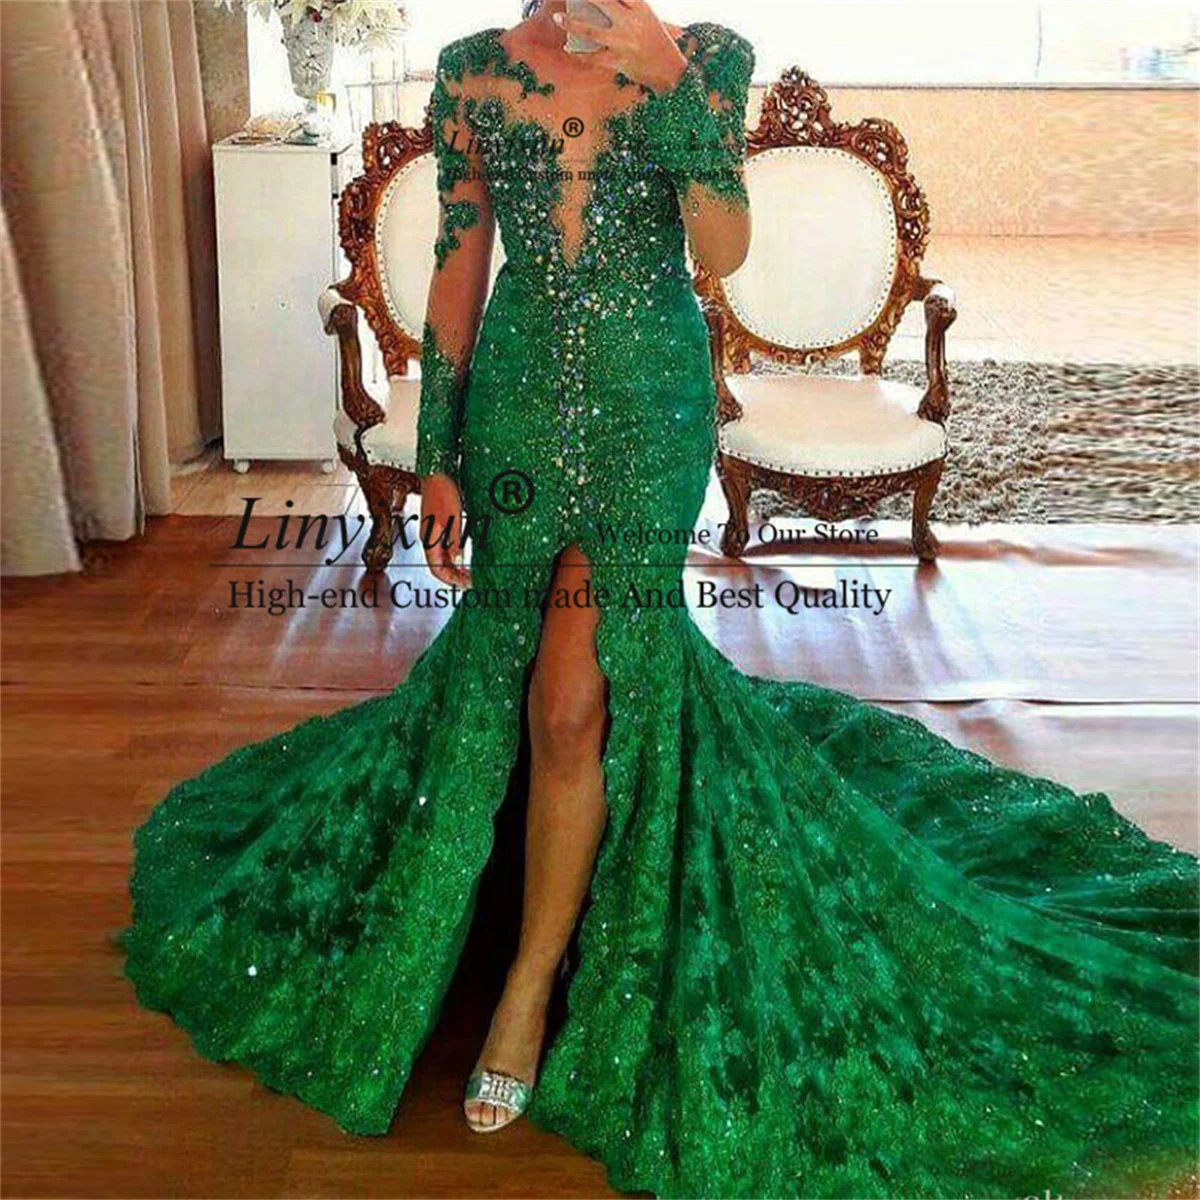 

Green Lace Mermaid Prom Dresses Sheer Neck Illusion Long Sleeves Sexy Split Evening Gown Sweep Train Saudi Arabia Party Dress